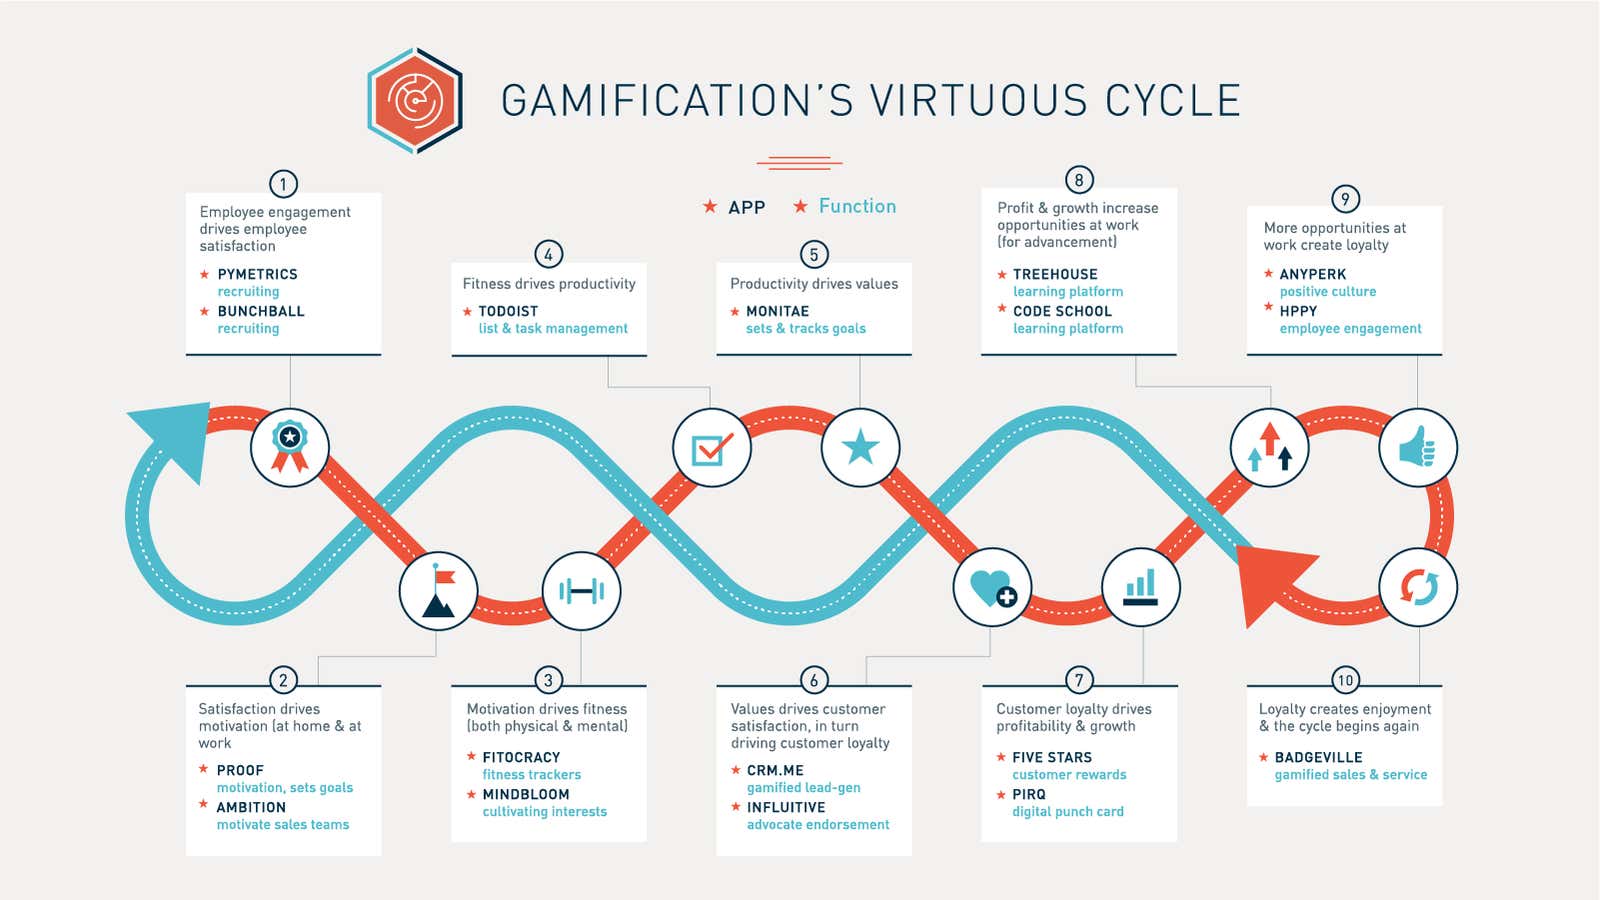 The value of gamification in the workplace